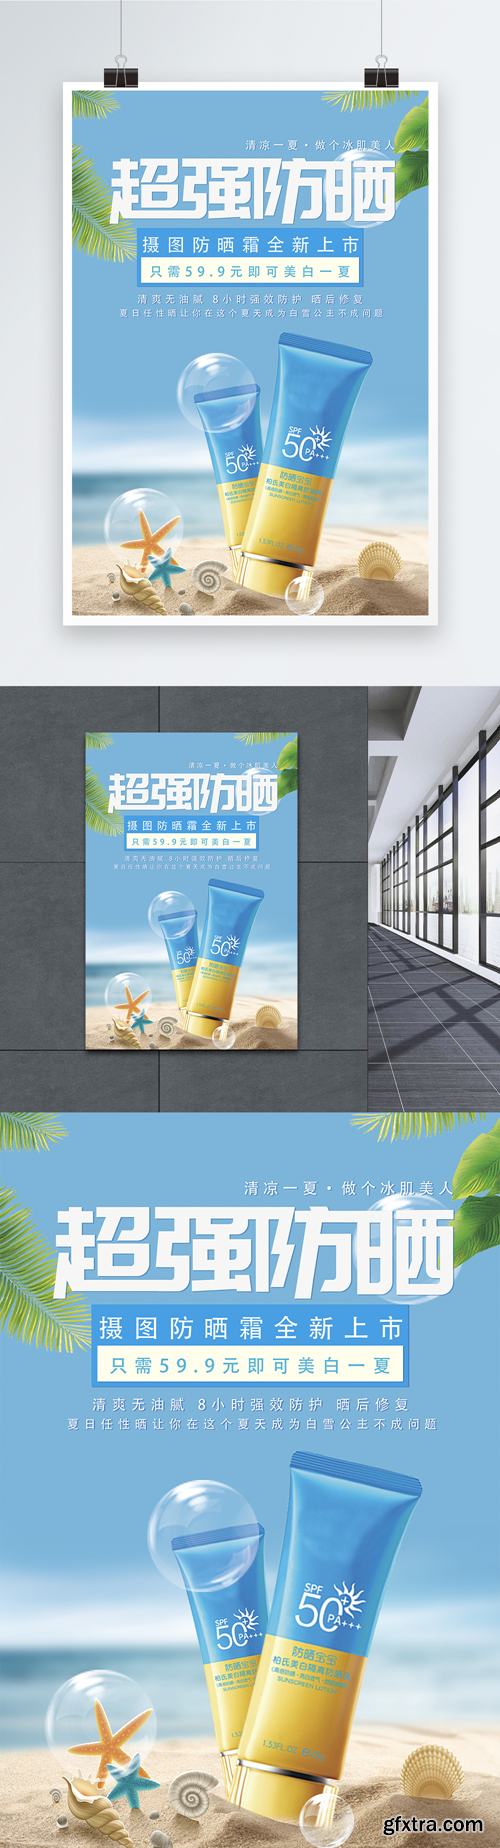 sunscreen promotion posters